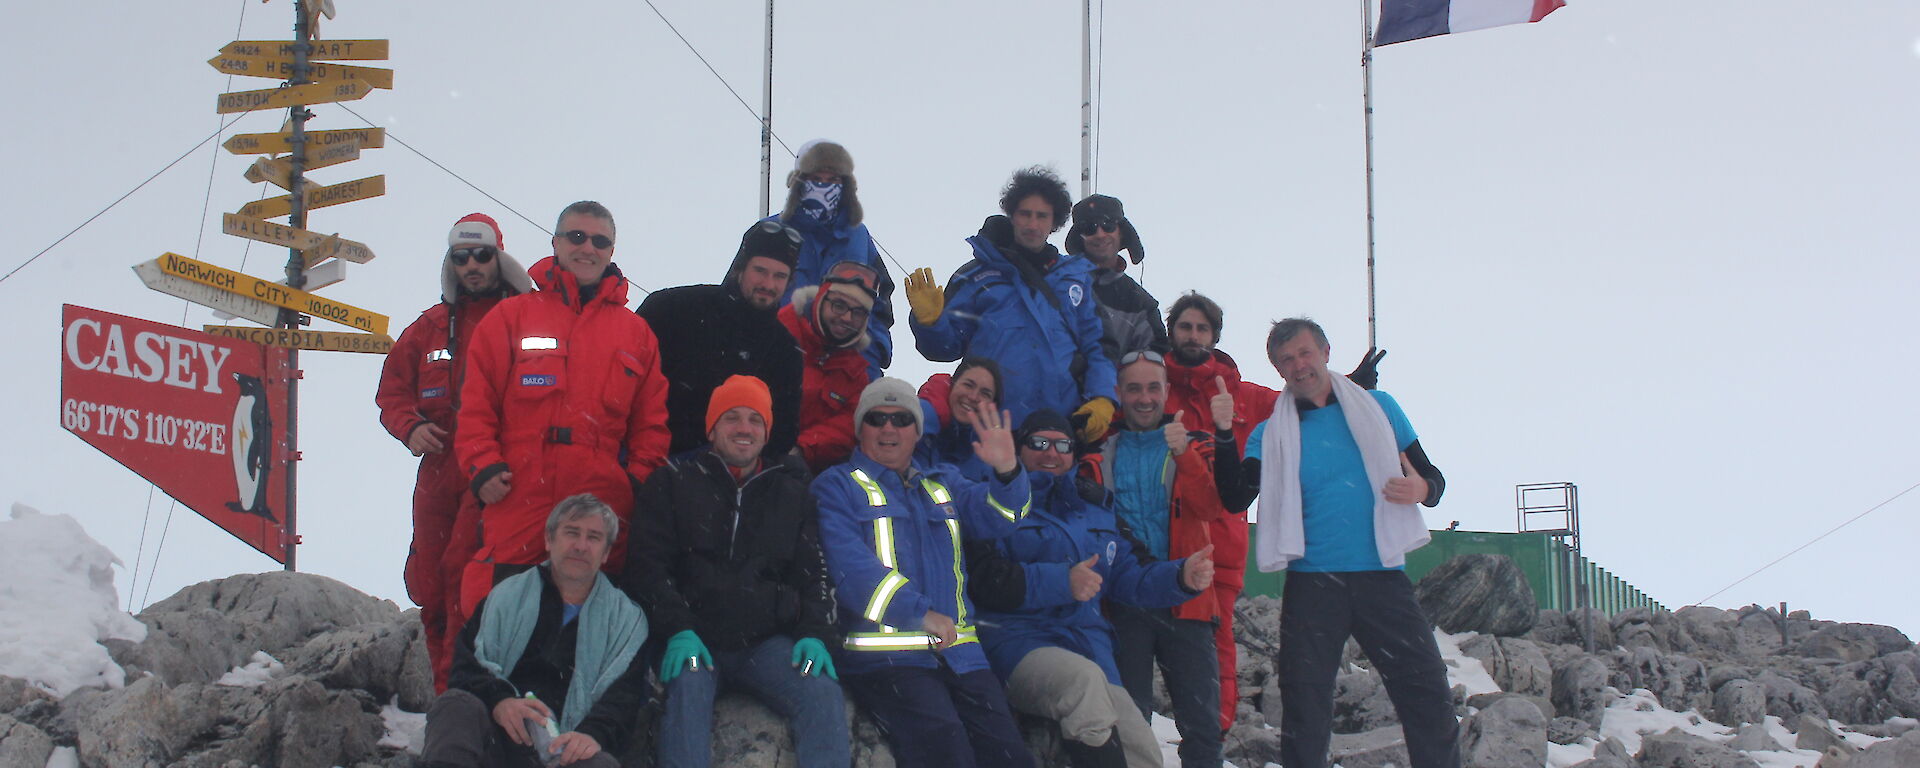 A gathering of French and Italian expeditioners at Casey